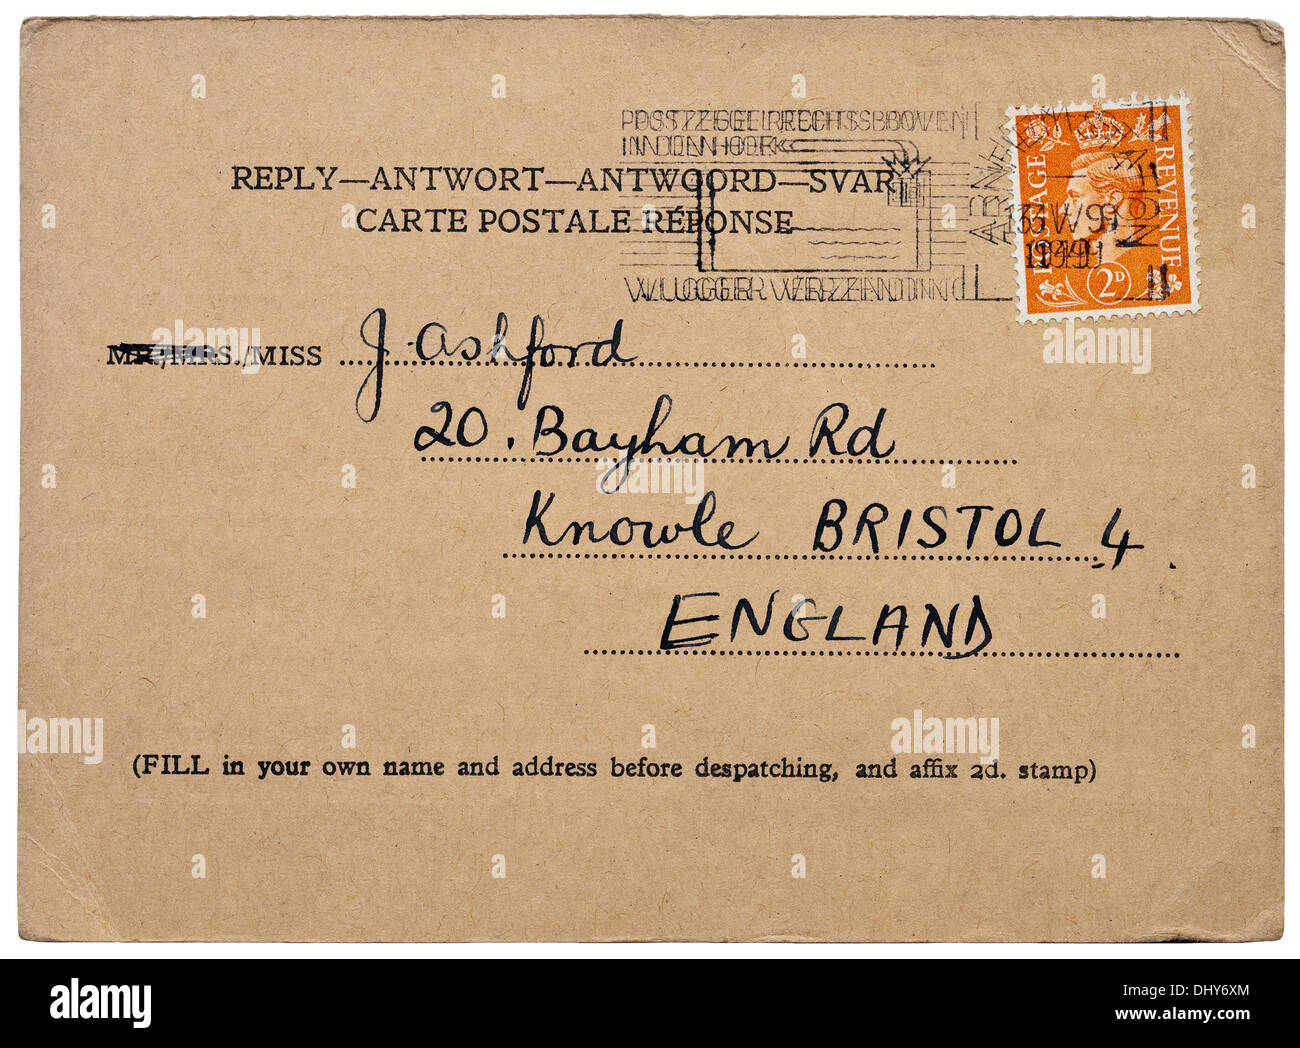 1949 British ordinary surface mail reply-card with 2d orange King George VI stamp addressed to England with Dutch Arnhem cancel. Stock Photo